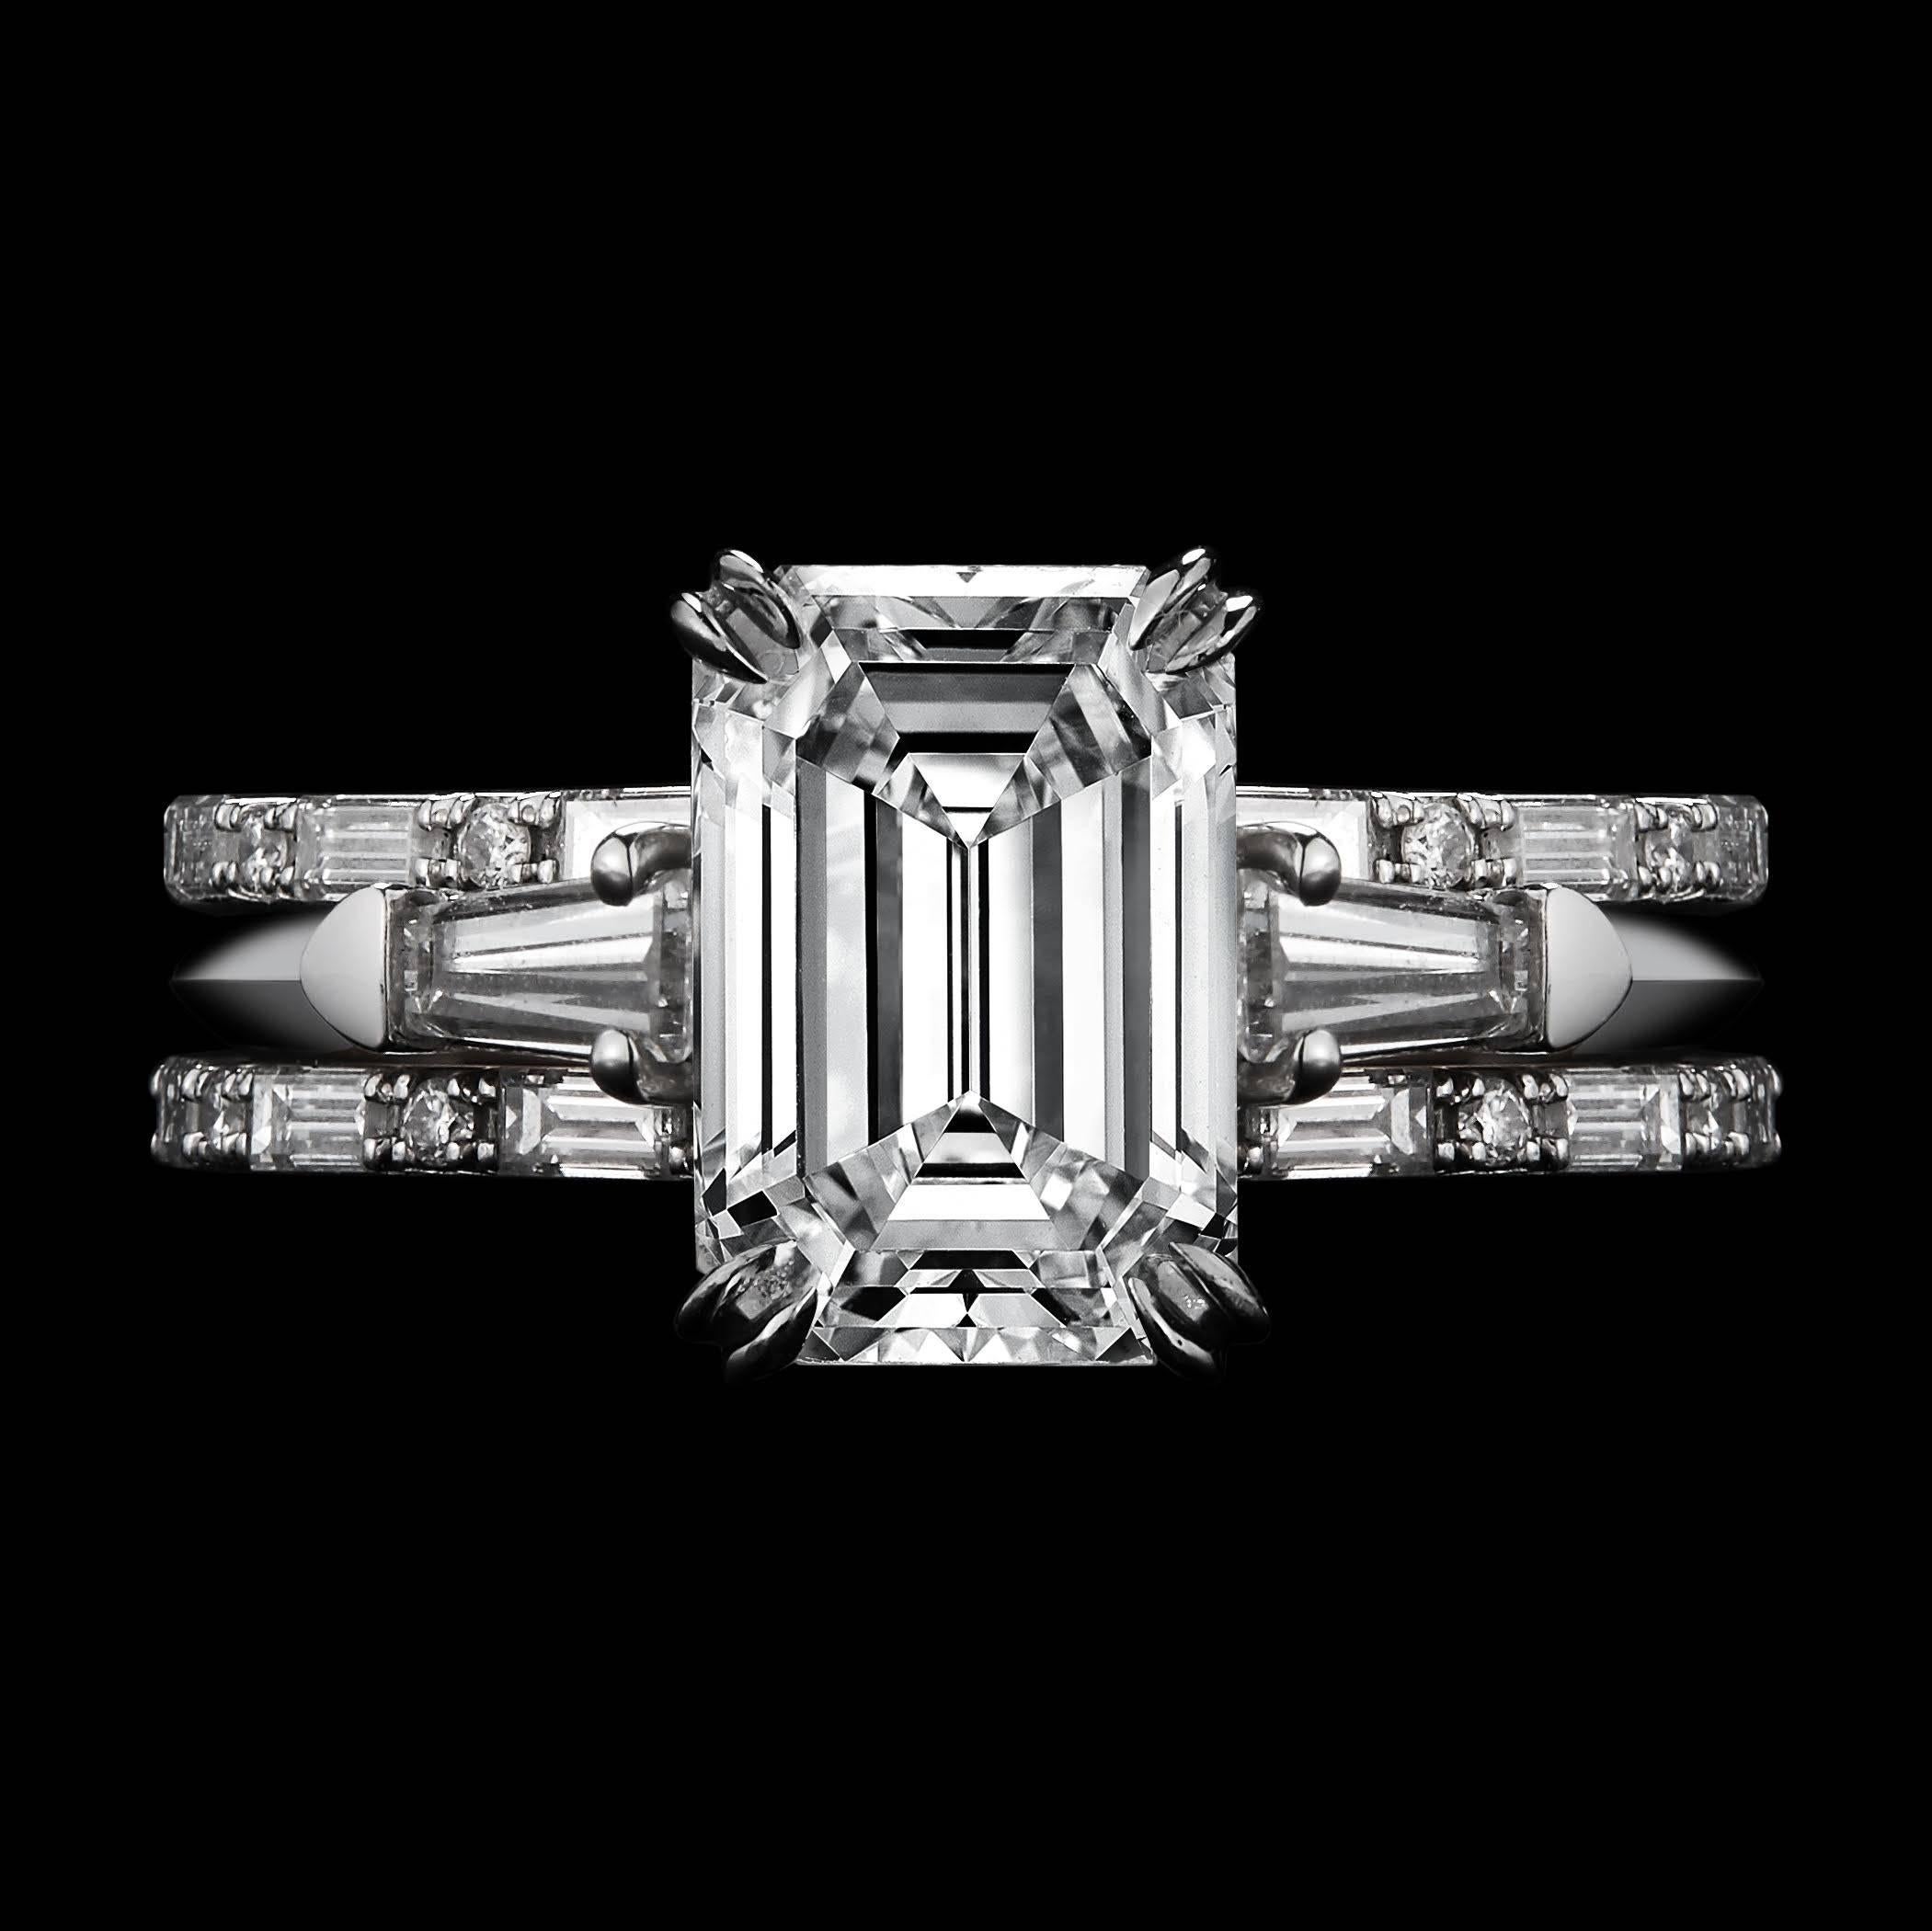 *This design is available with center diamonds weighing from 1ct - 10 cts and larger. Please contact us for more information on this piece or on creating your own custom Alexandra Mor Design.  

Alexandra Mor Three ring Emerald Cut Diamond and